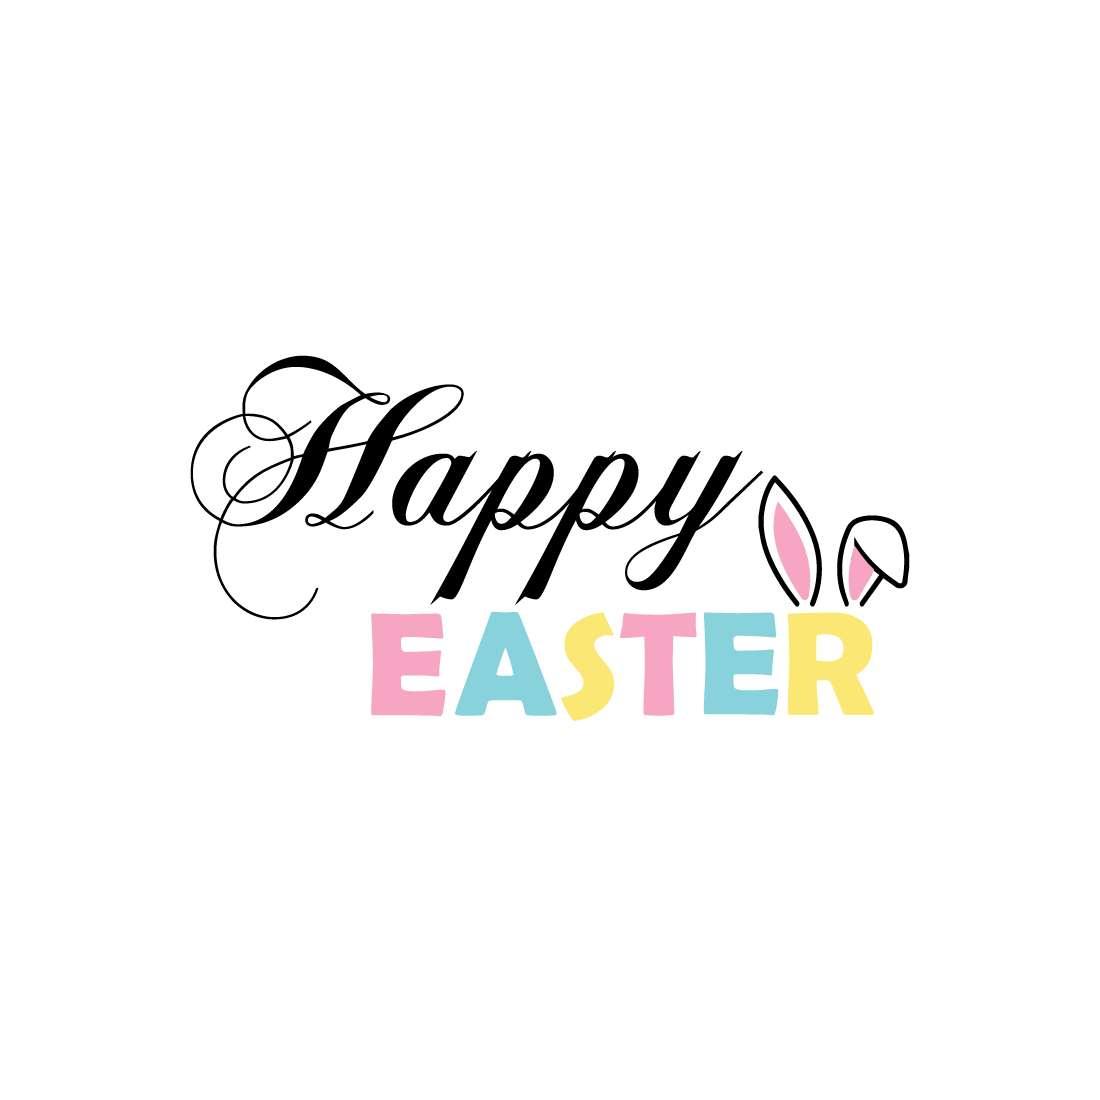 9 EASTER T Shirts designs cover image.